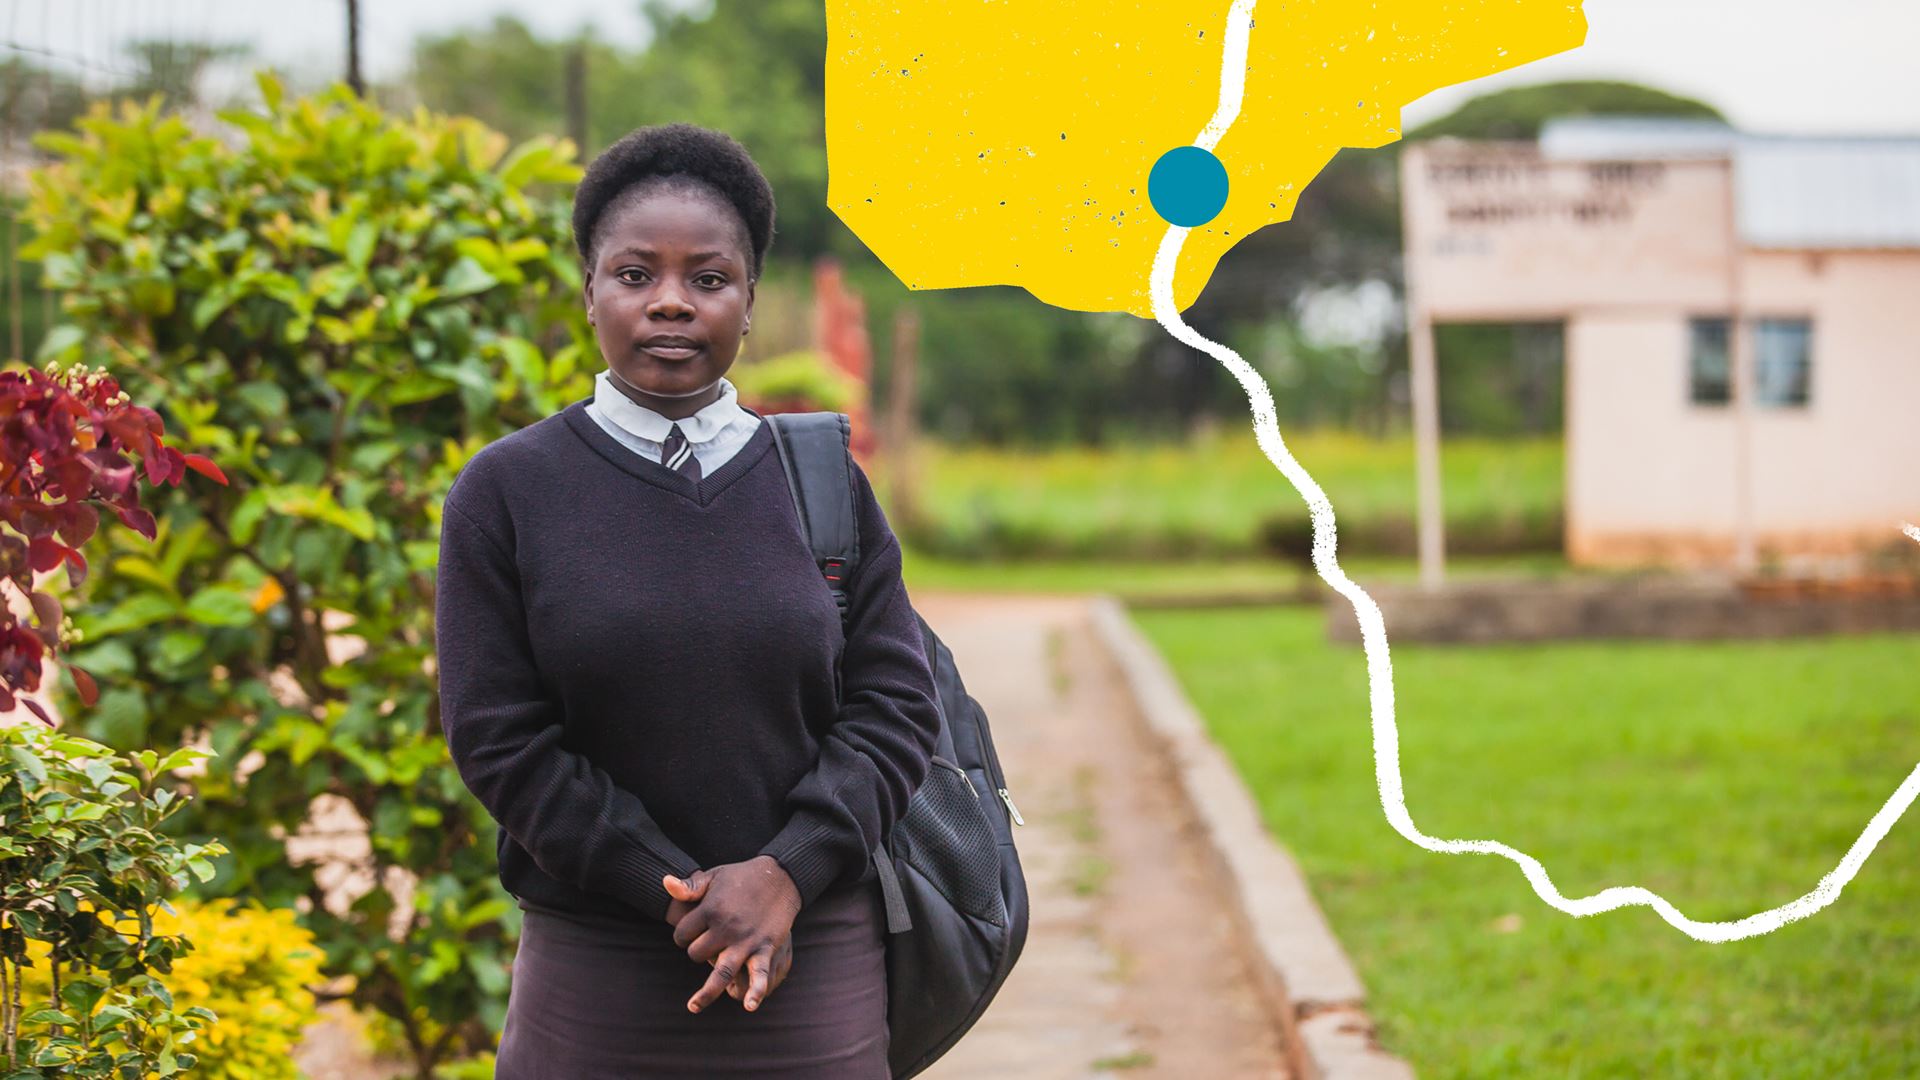 In the foreground, a student is dressed in uniform, with a backpack over one shoulder.  In the background there is a yellow graphic in the silhouette of Zambia.